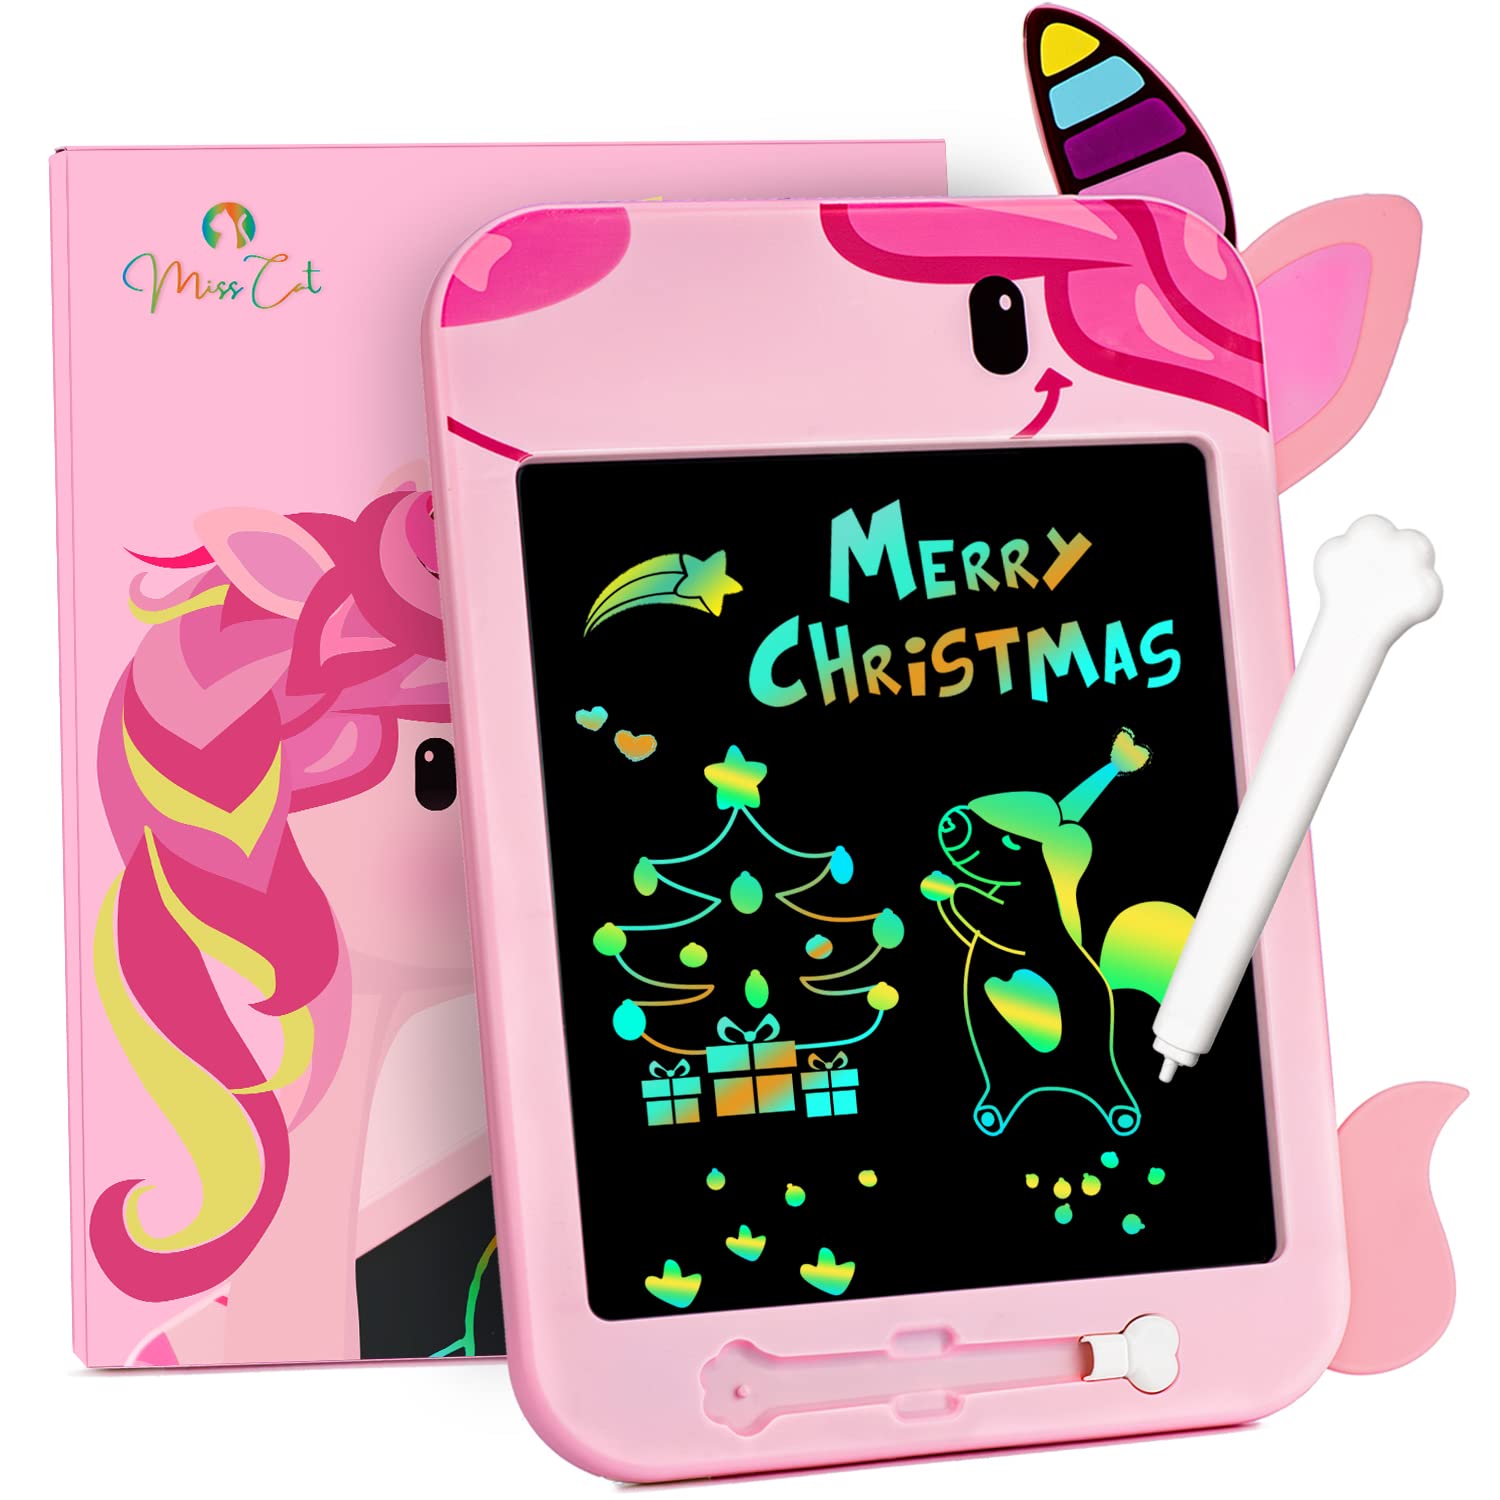 Misscat Toys for 3-8 Year Old Girls Boys, 10.5 in Coloring LCD Writing Tablet Doodle Board Drawing Pad, Learning Educational Travel Toddler Toys Birthday Christmas Gifts for Kids 3 4 5 6 Yr, Unicorn